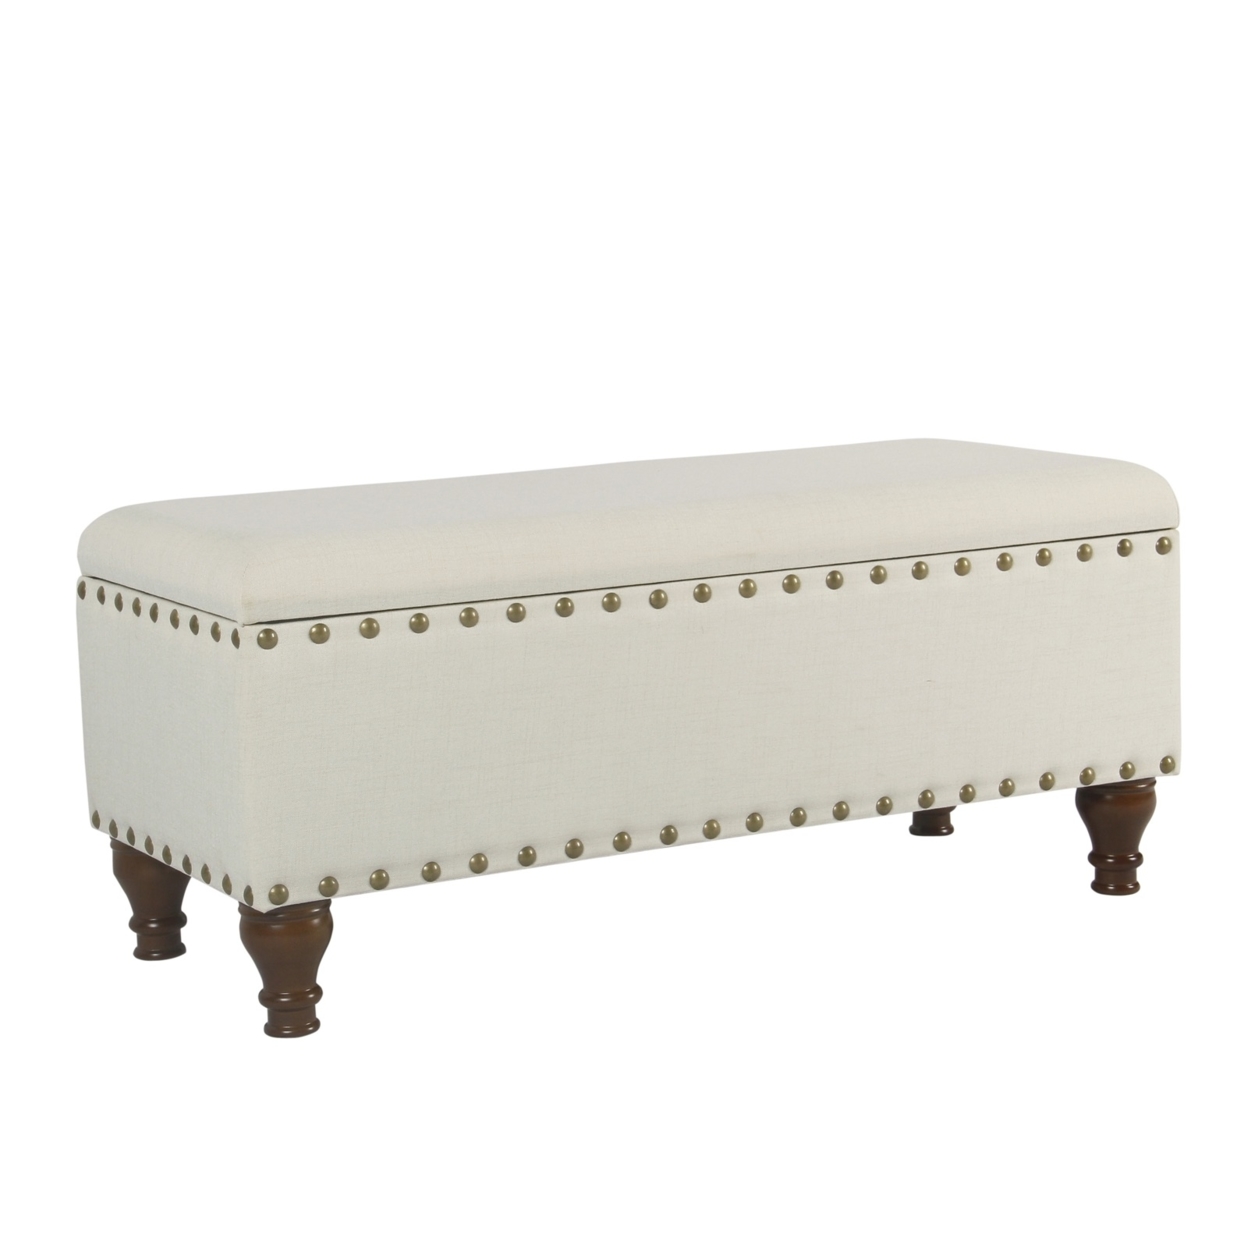 Fabric Upholstered Wooden Storage Bench With Nail Head Trim, Large, Cream And Brown- Saltoro Sherpi